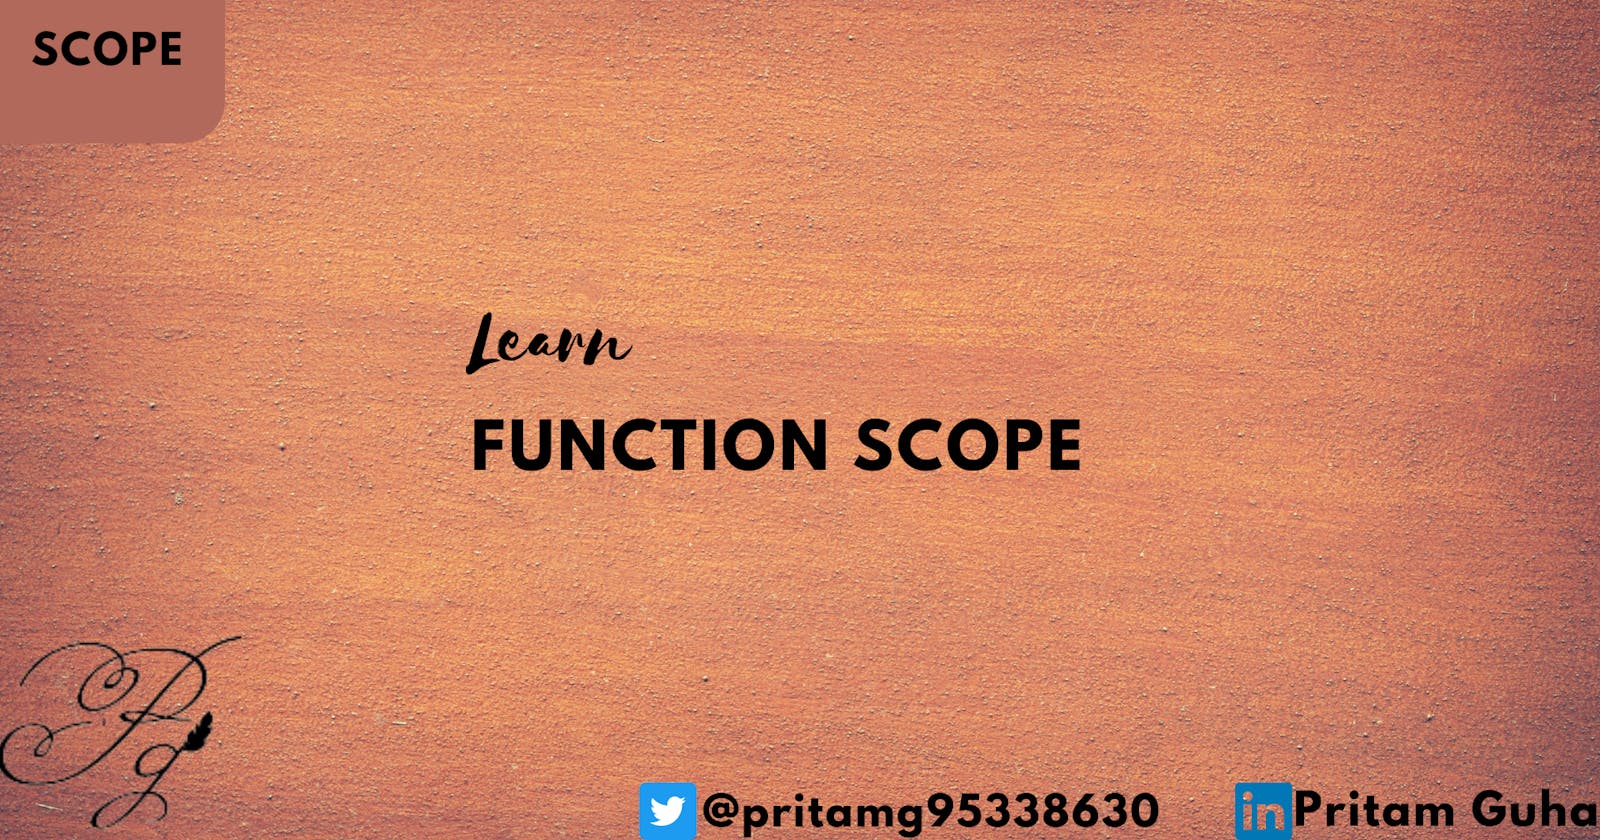 What is Function Scope?